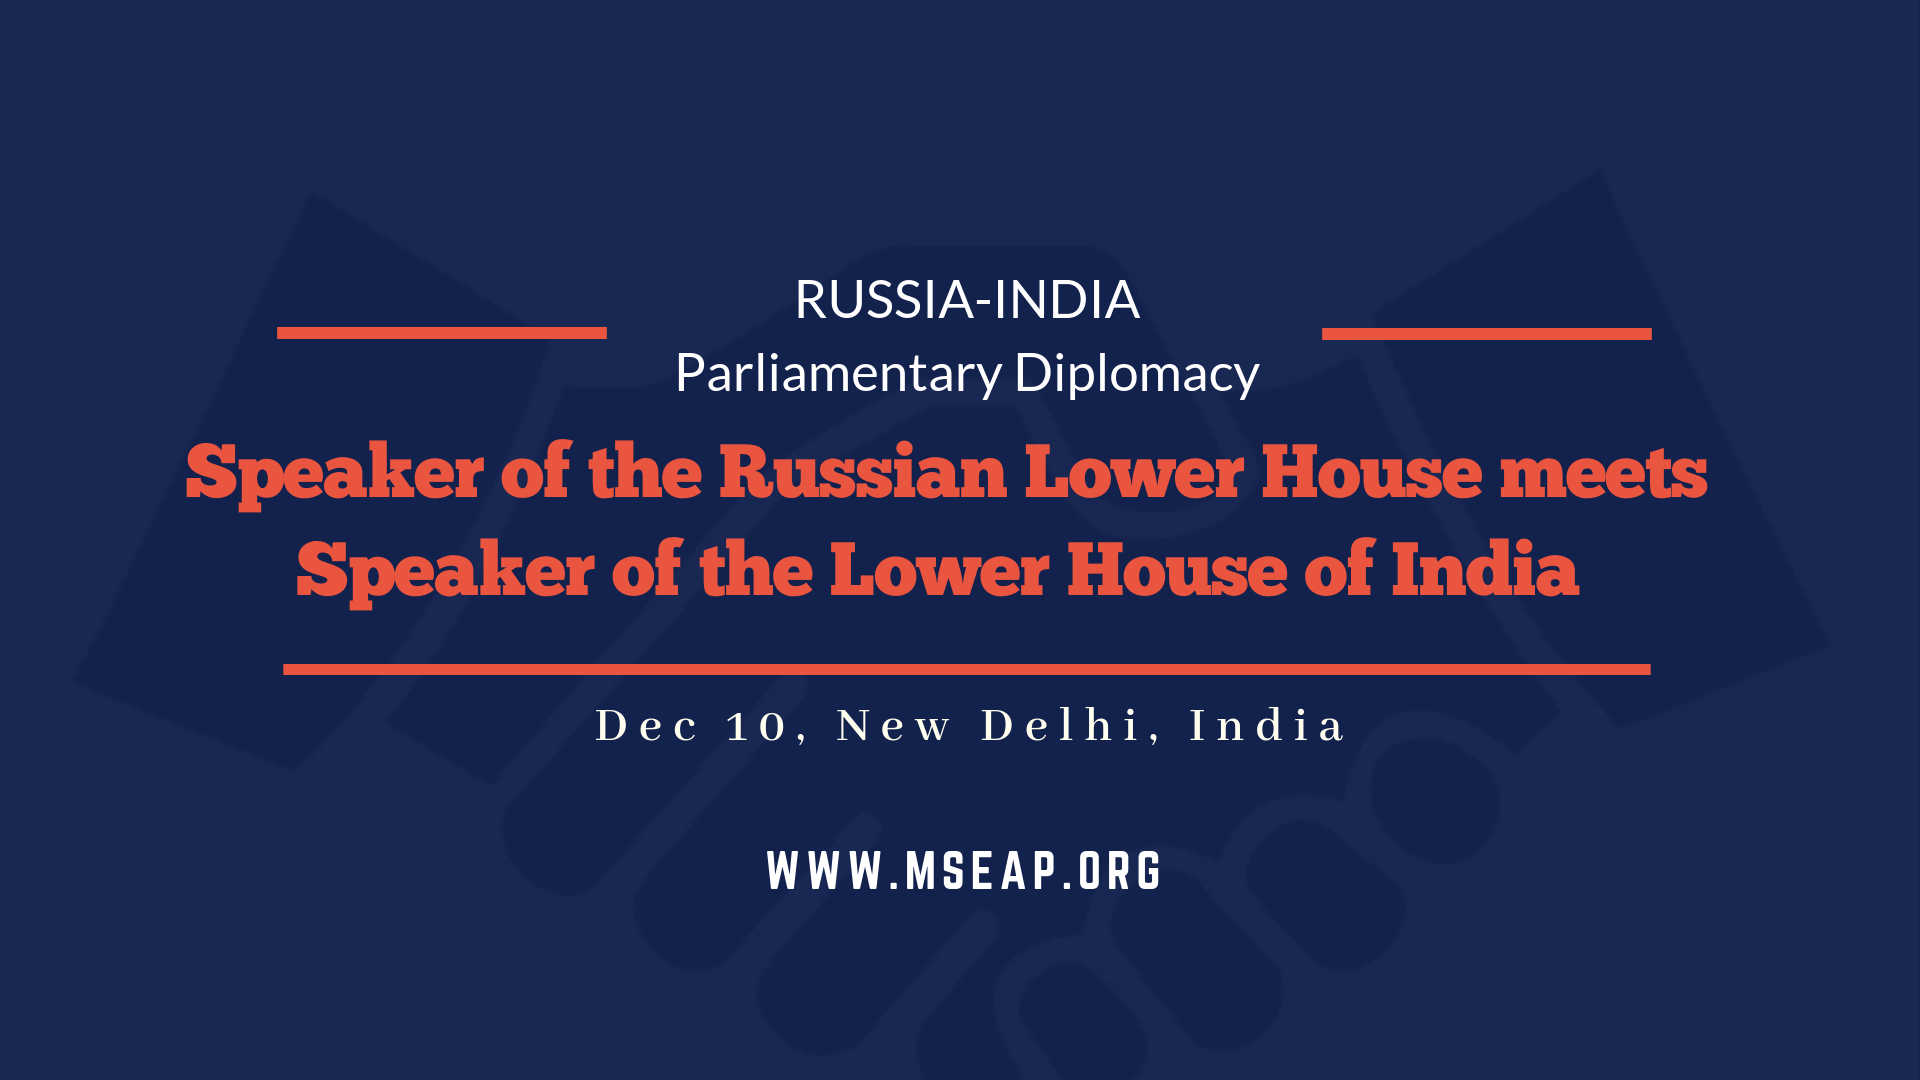 Speaker of Russian lower house meets the vice-president, the prime minister, and the lower house speaker of India